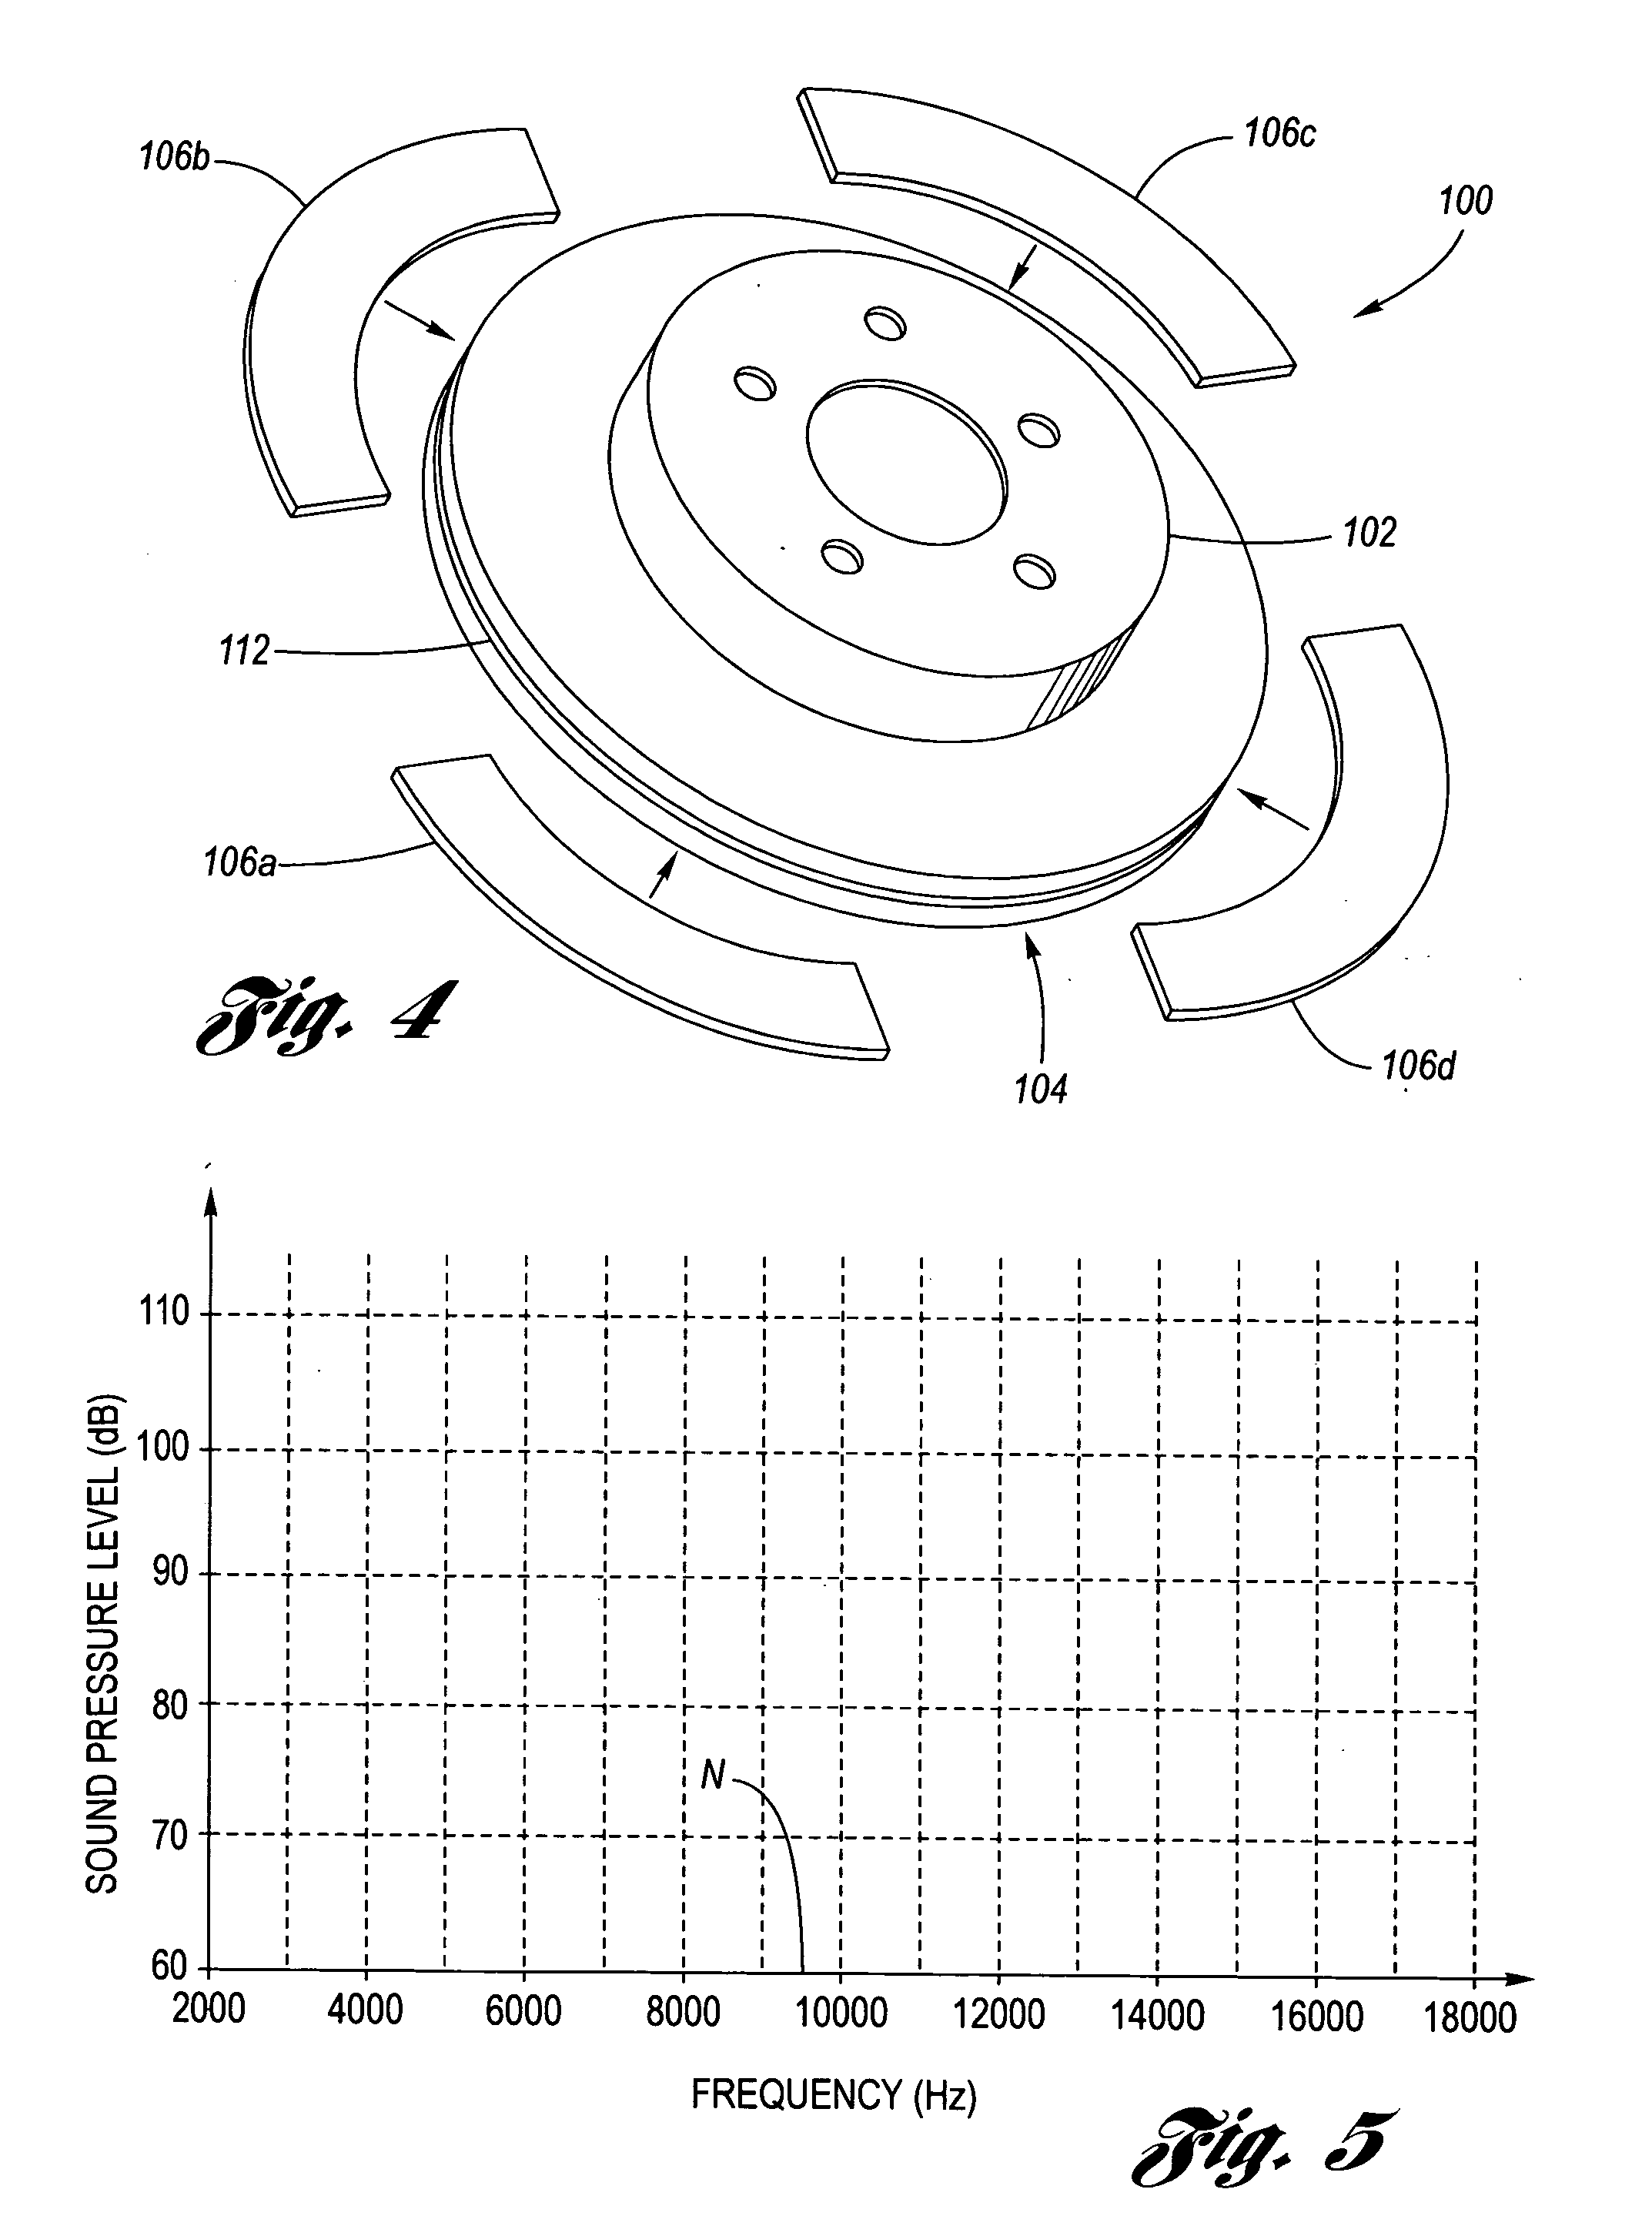 Coulomb friction damped disc brake rotors